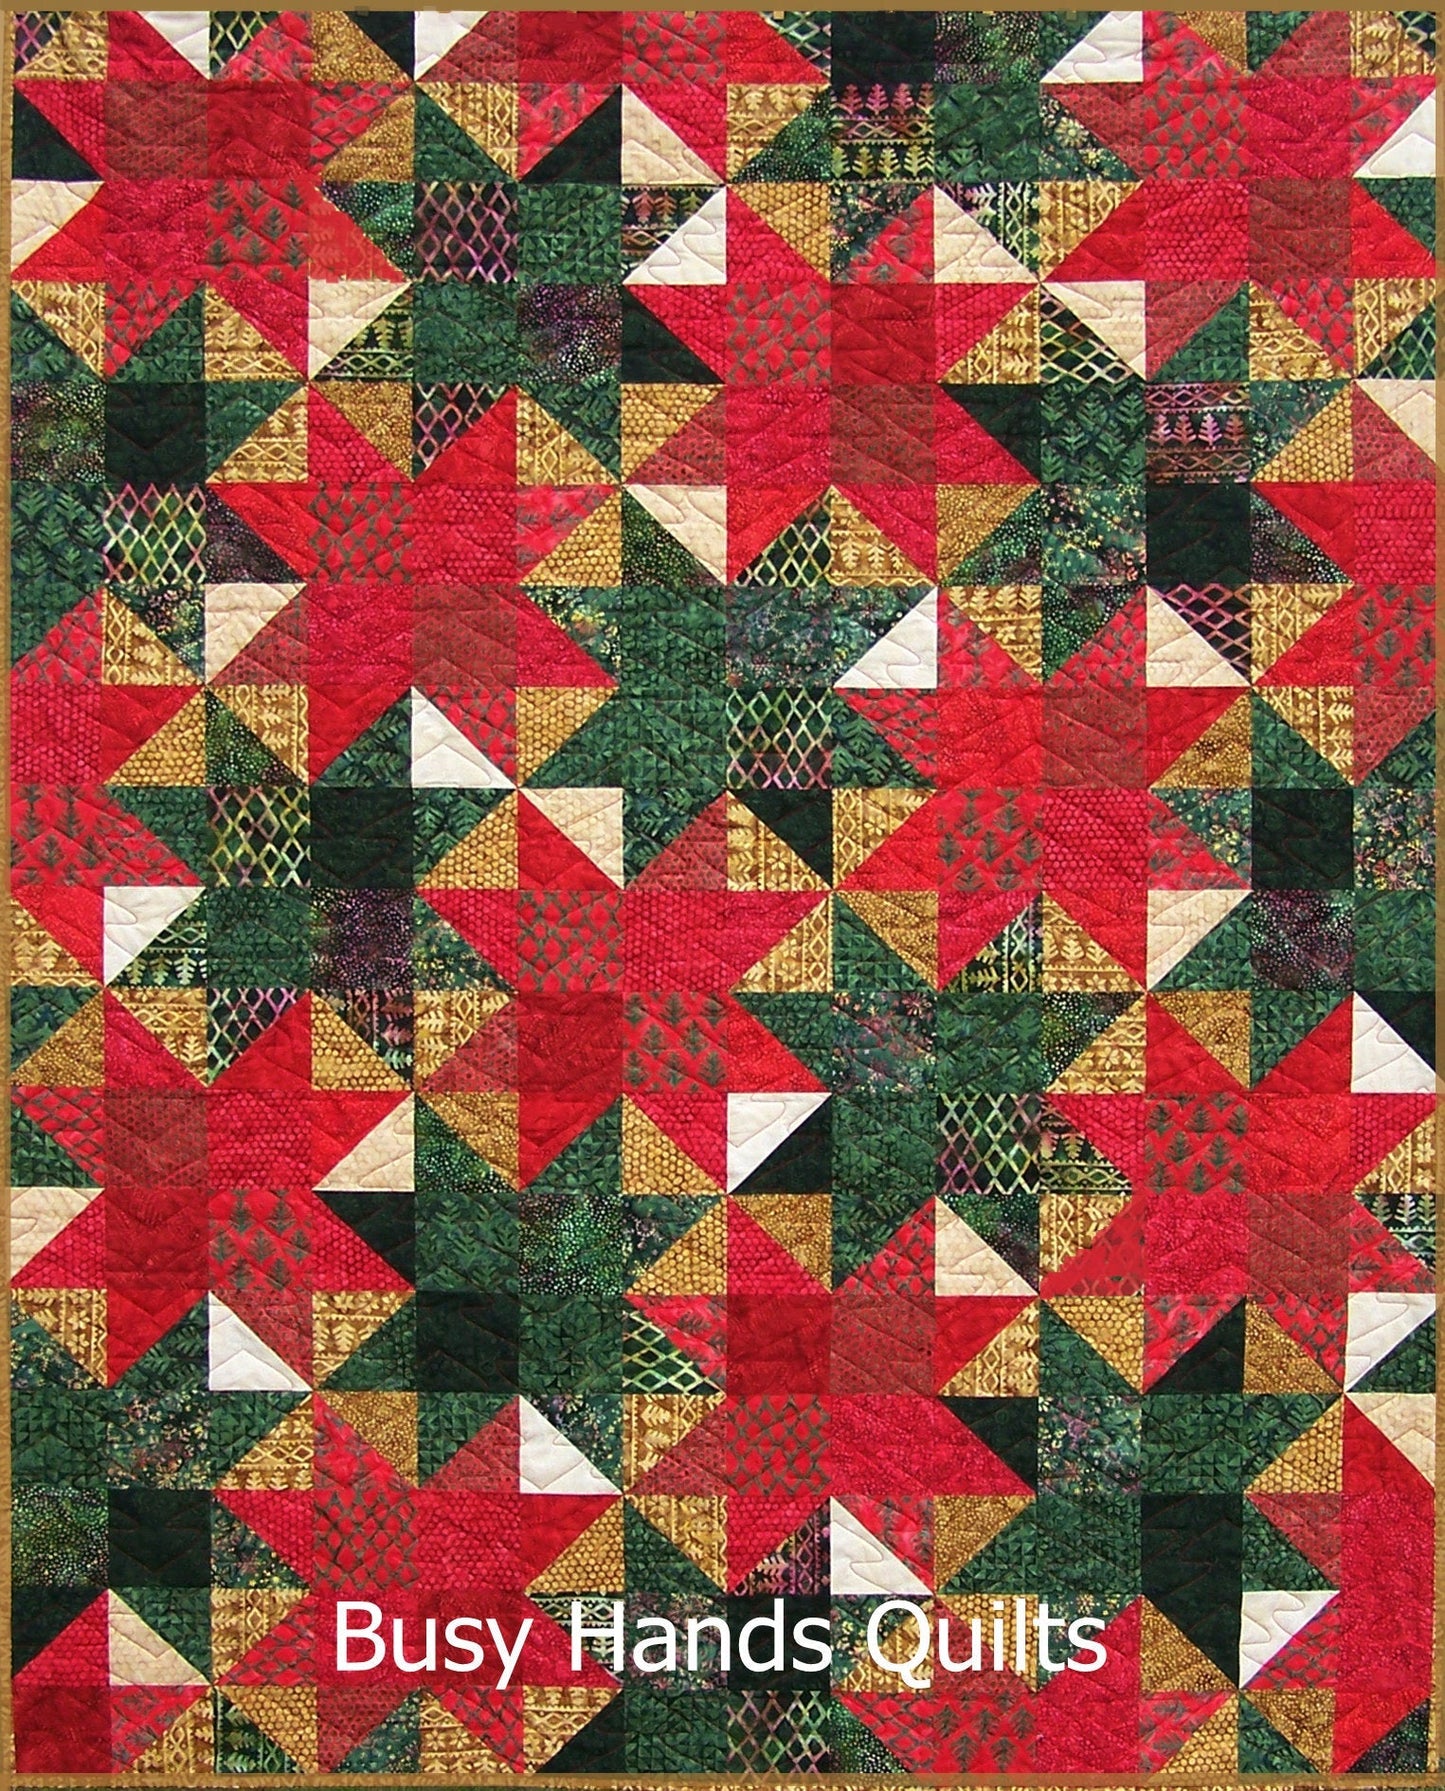 Sunnyside Quilt Pattern PDF DOWNLOAD Busy Hands Quilts $12.99